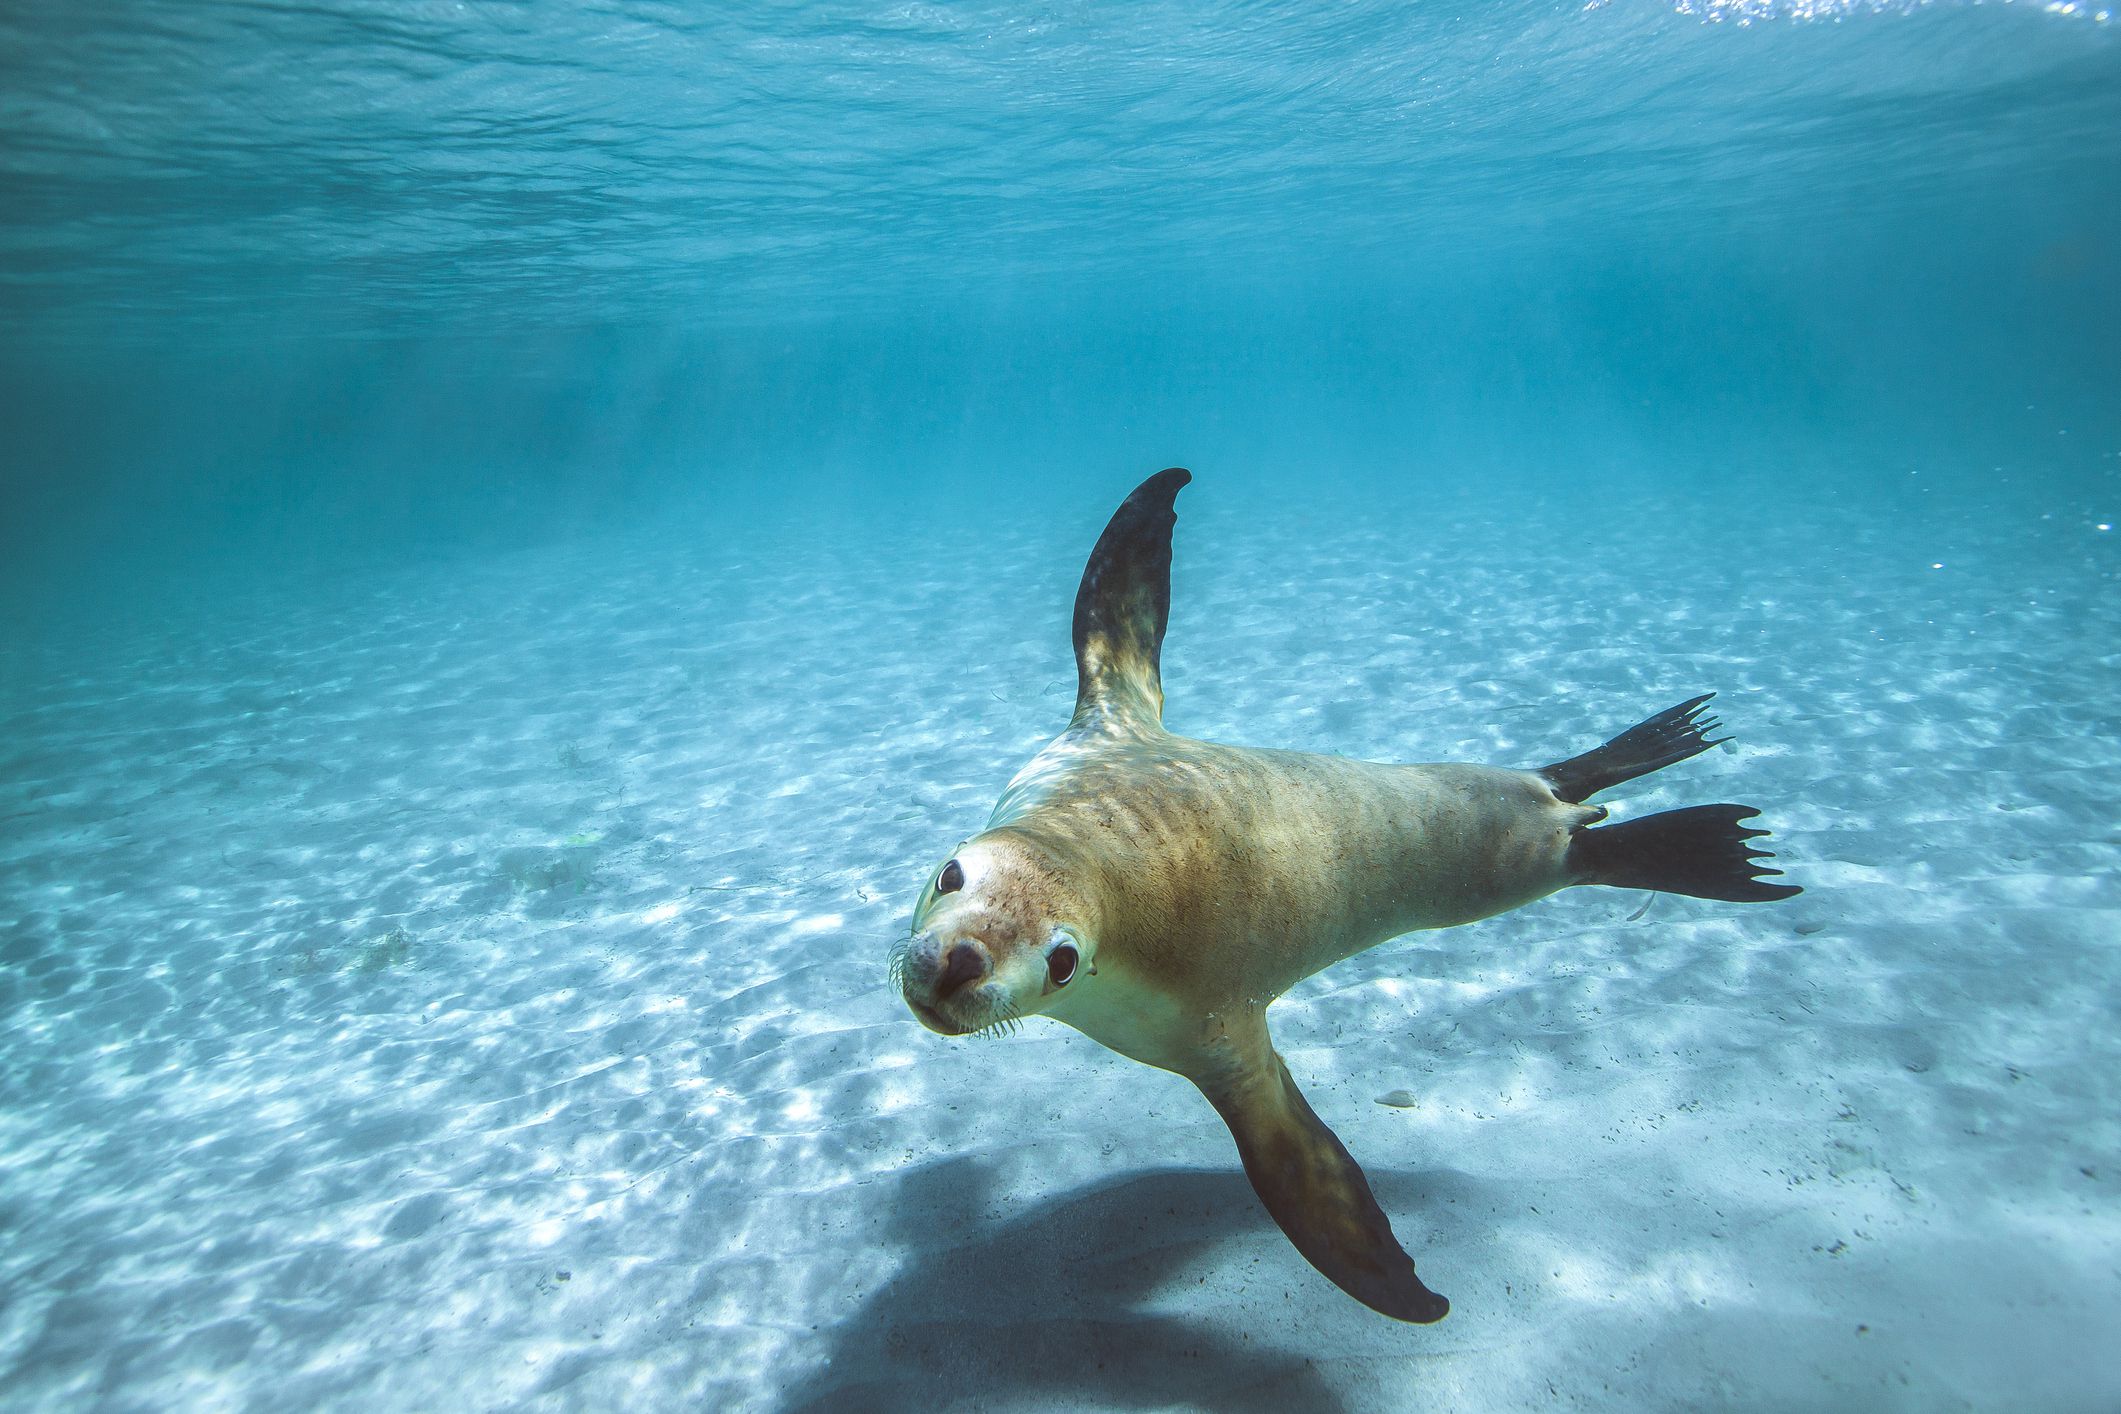 <p>The Caribbean Monk Seal was declared extinct in 2008 due to <a href="https://www.marinebio.org/caribbean-monk-seals-declared-extinct/#google_vignette">overhunting and habitat loss</a>. They were hunted extensively for their skin and blubber, which could be used to make cooking and heating oil as well as clothing. <a href="https://seahistory.org/sea-history-for-kids/caribbean-monk-seal/">Human activities</a> also destroyed their coastal habitats by leaving them with fewer places to rest and breed. The depletion of their food sources due to overfishing further contributed to their decline.</p>